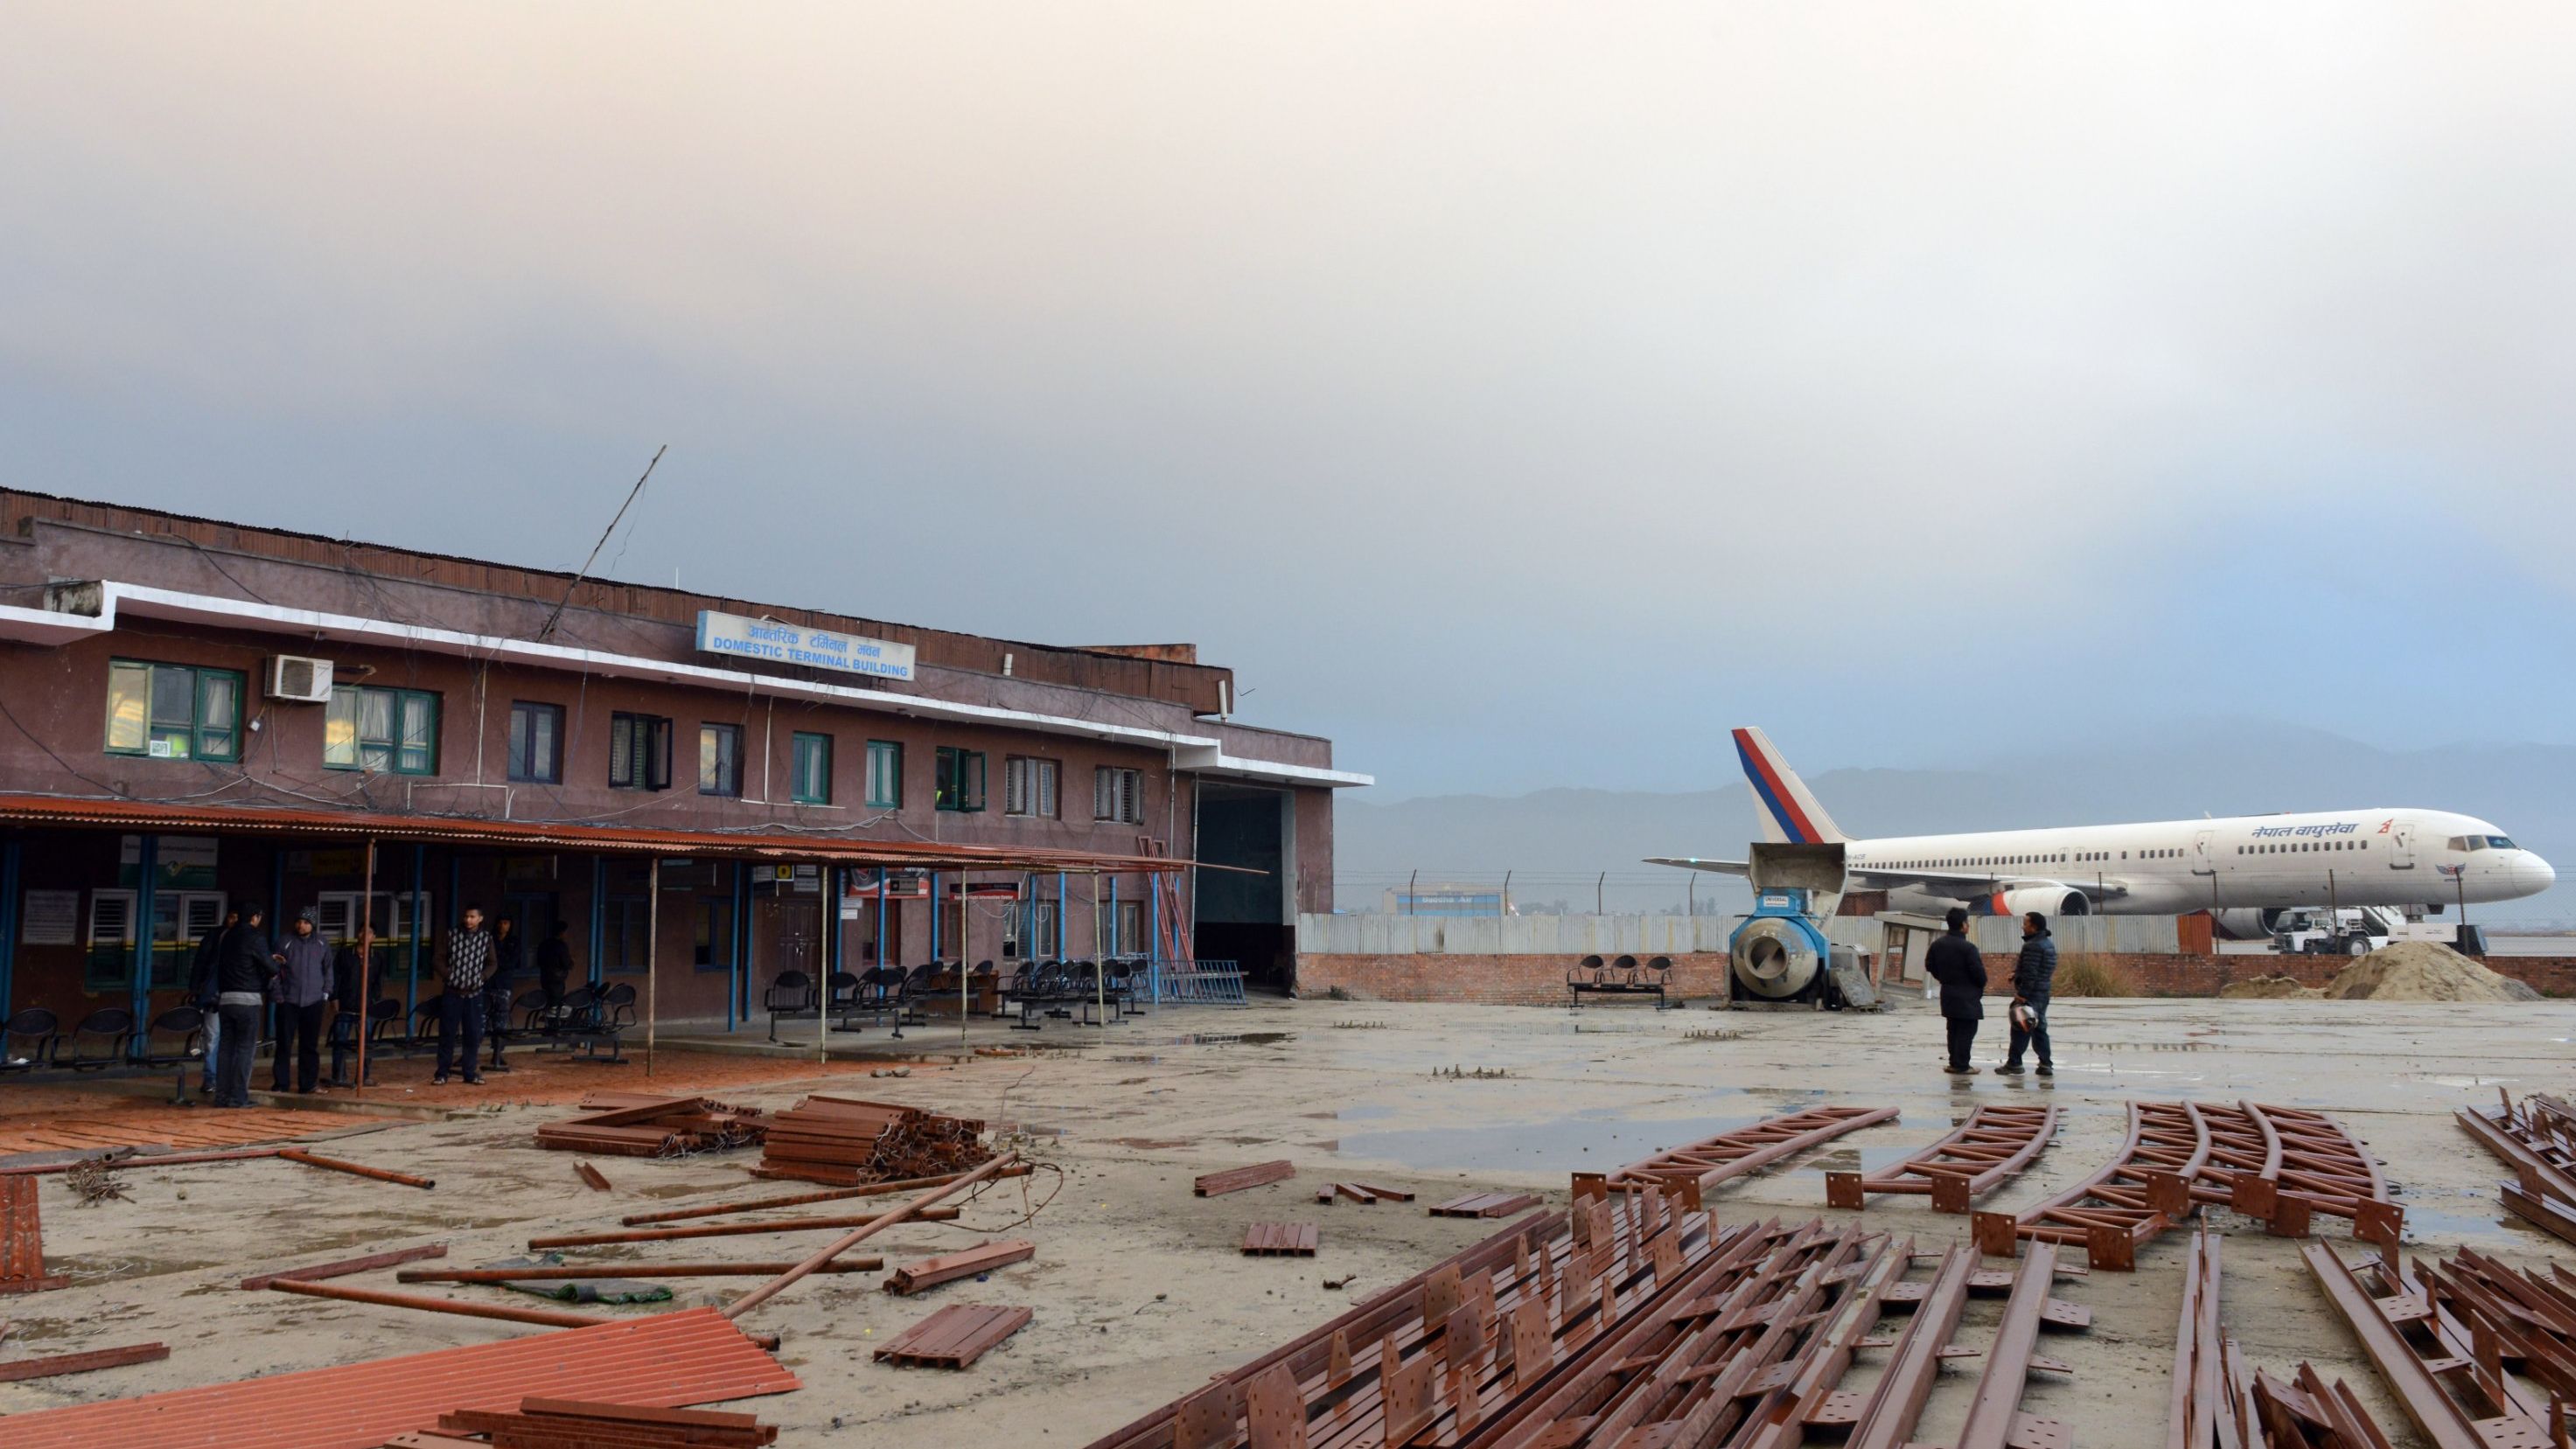 The domestic terminal building, after a domestic plane crashed in Kathmandu on February 16, 2014. 